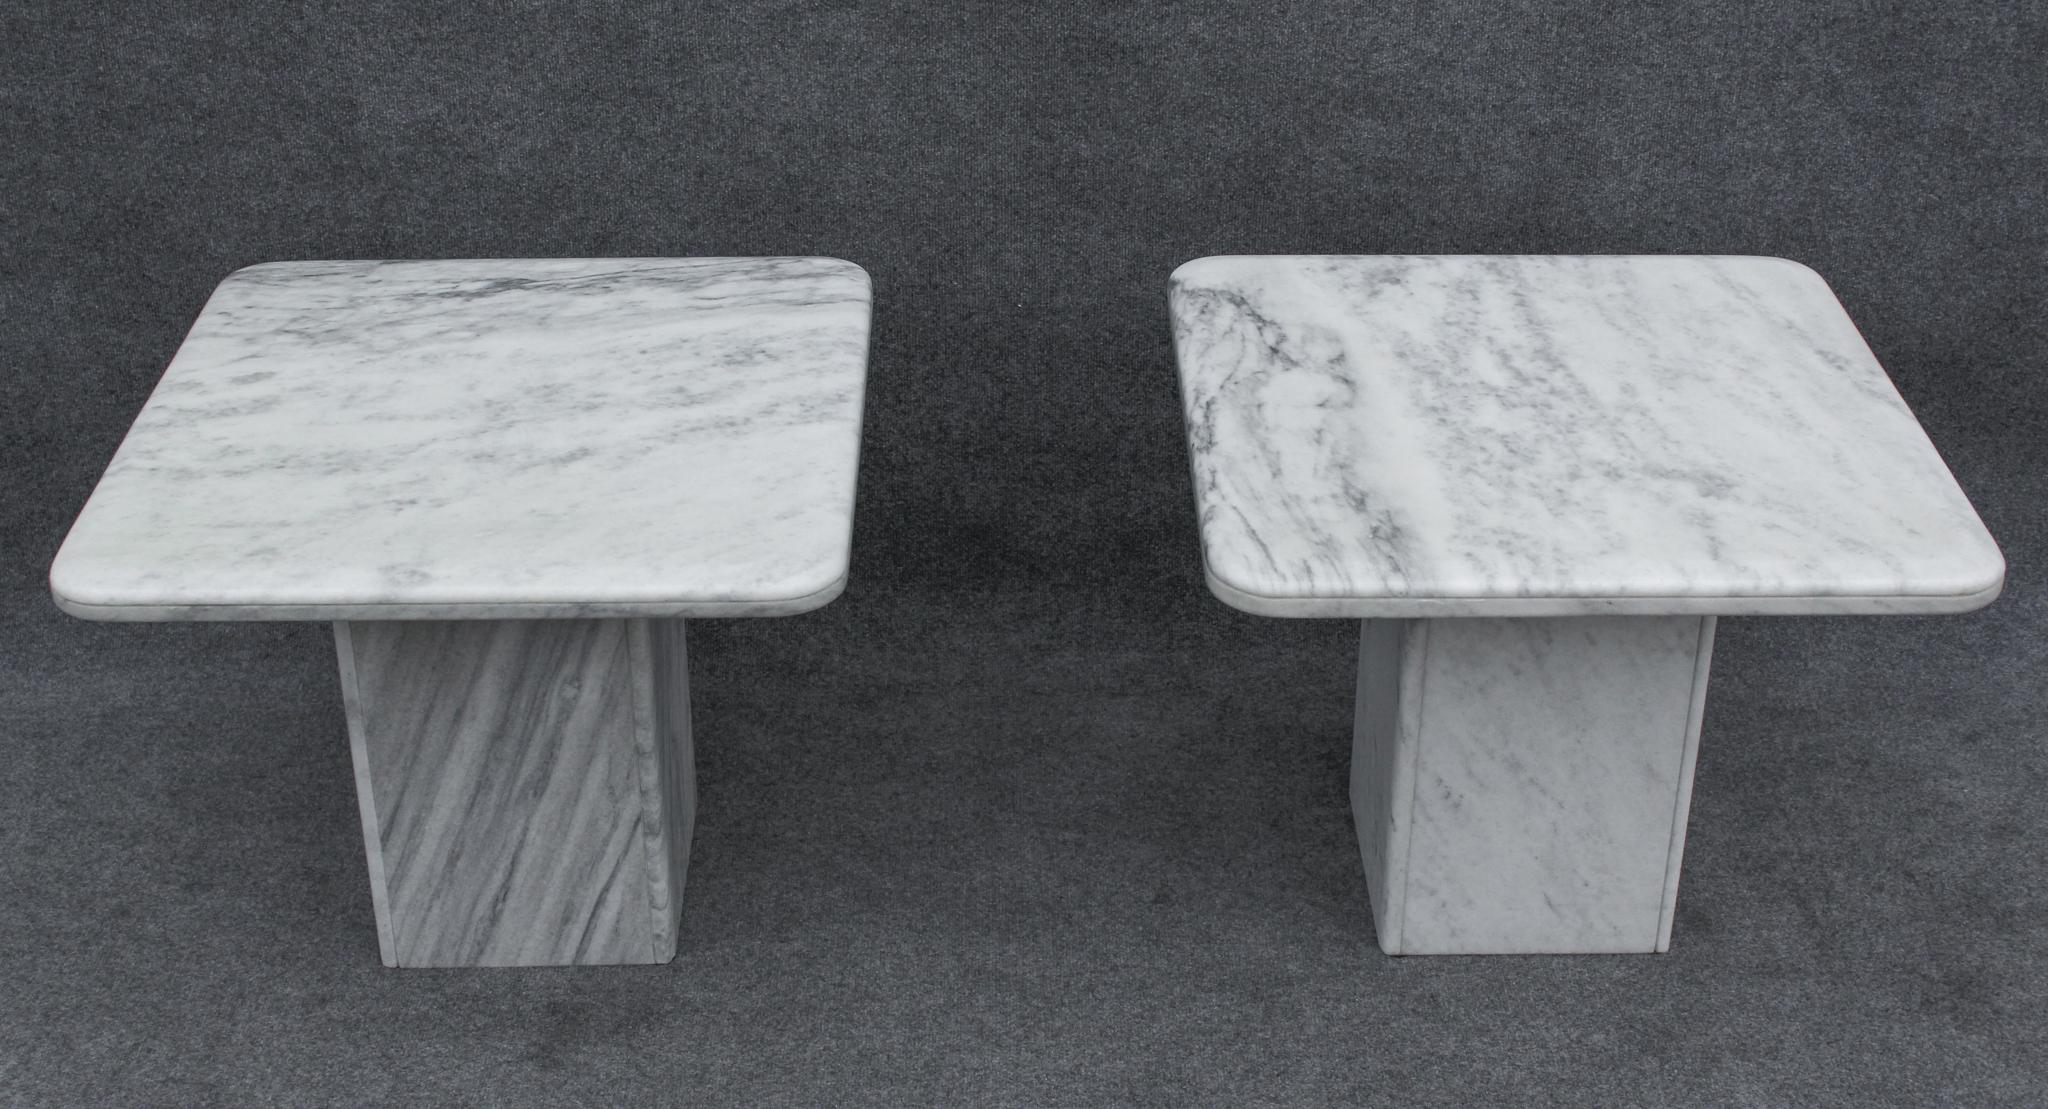 Pair of Italian Side Tables in White Marble With Grey Veining 1970s In Good Condition For Sale In Philadelphia, PA